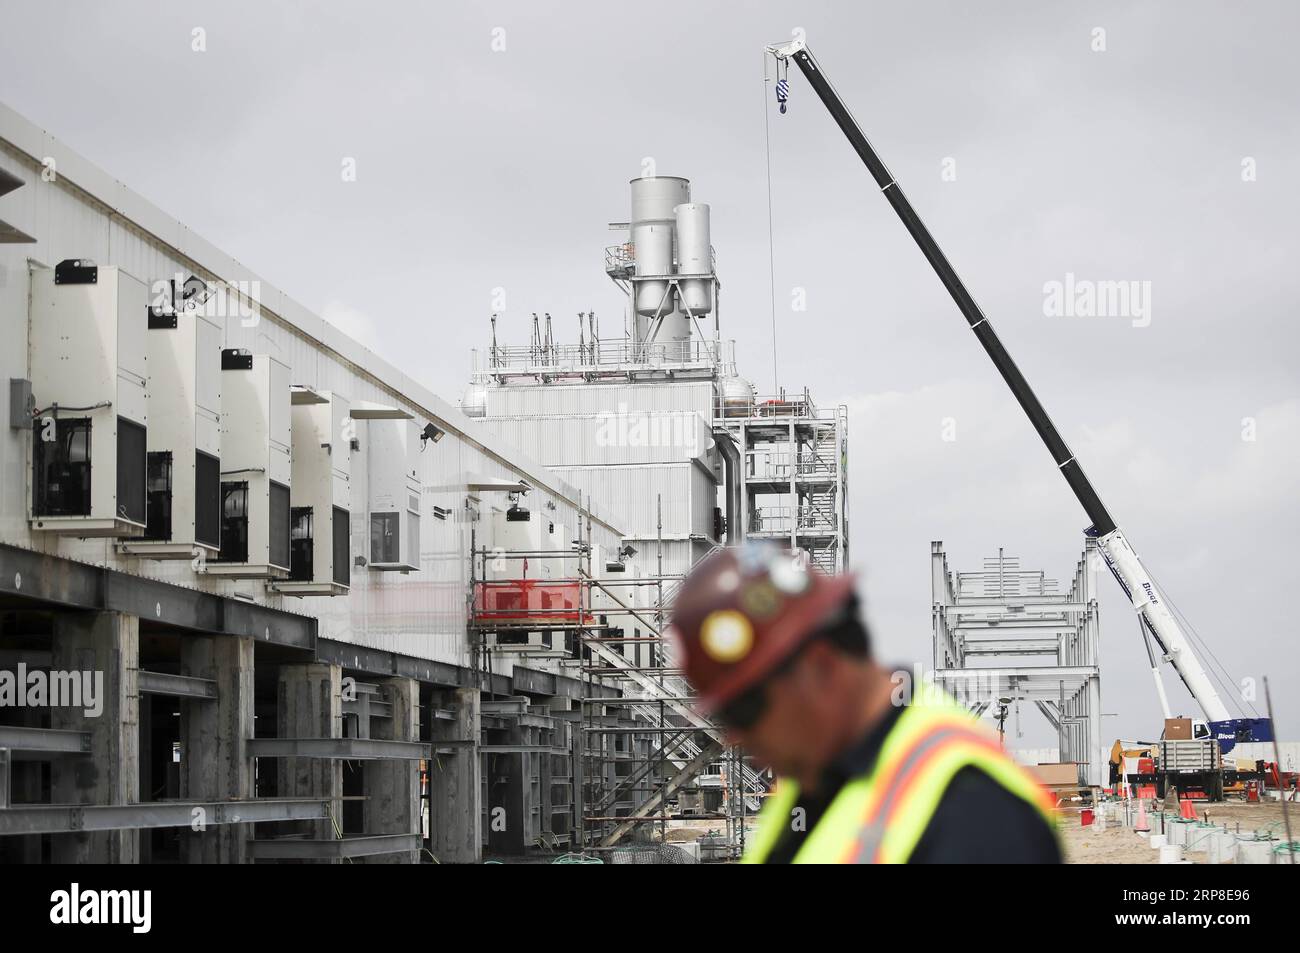 (190301) -- ST. JAMES PARISH (U.S.), March 1, 2019 -- The photo taken on Feb. 28, 2019 shows the construction site of Yuhuang s methanol project in St. James Parish, Louisiana, the United States. Yuhuang s methanol project, the largest greenfield investment in methanol by a Chinese company in the southern U.S. state of Louisiana, is making significant progress in its construction, according to China s Yuhuang Chemical Inc. (YCI) on Friday. ) U.S.-ST. JAMES PARISH-YUHUANG METHANOL PROJECT WangxYing PUBLICATIONxNOTxINxCHN Stock Photo